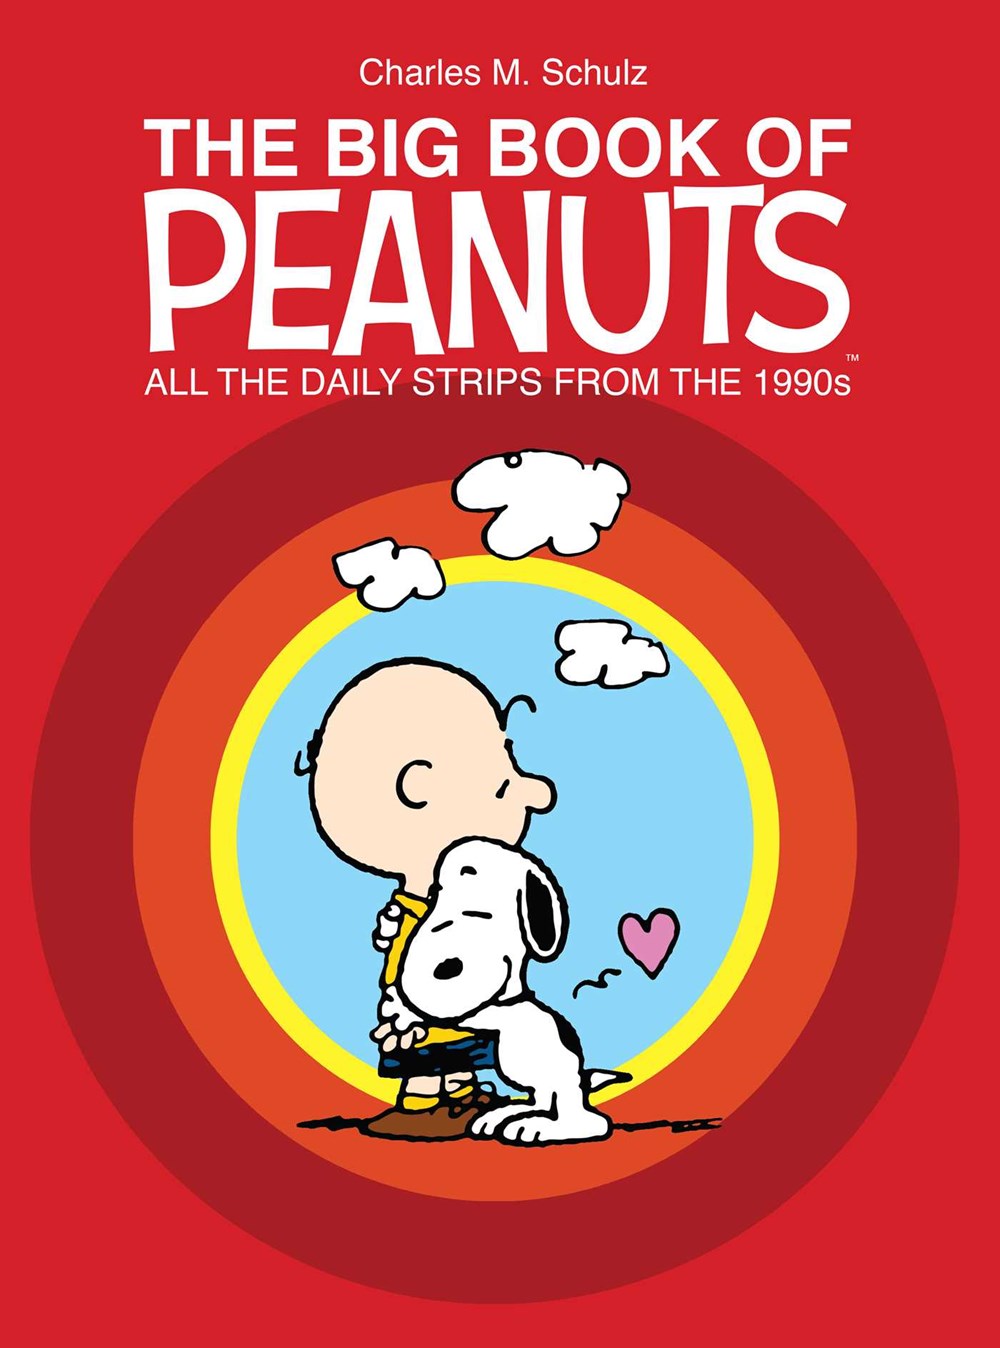 ‘The Big Book of Peanuts: All the Daily Strips from the 1990s’ by Charles M. Schulz | LJ Review of the Day